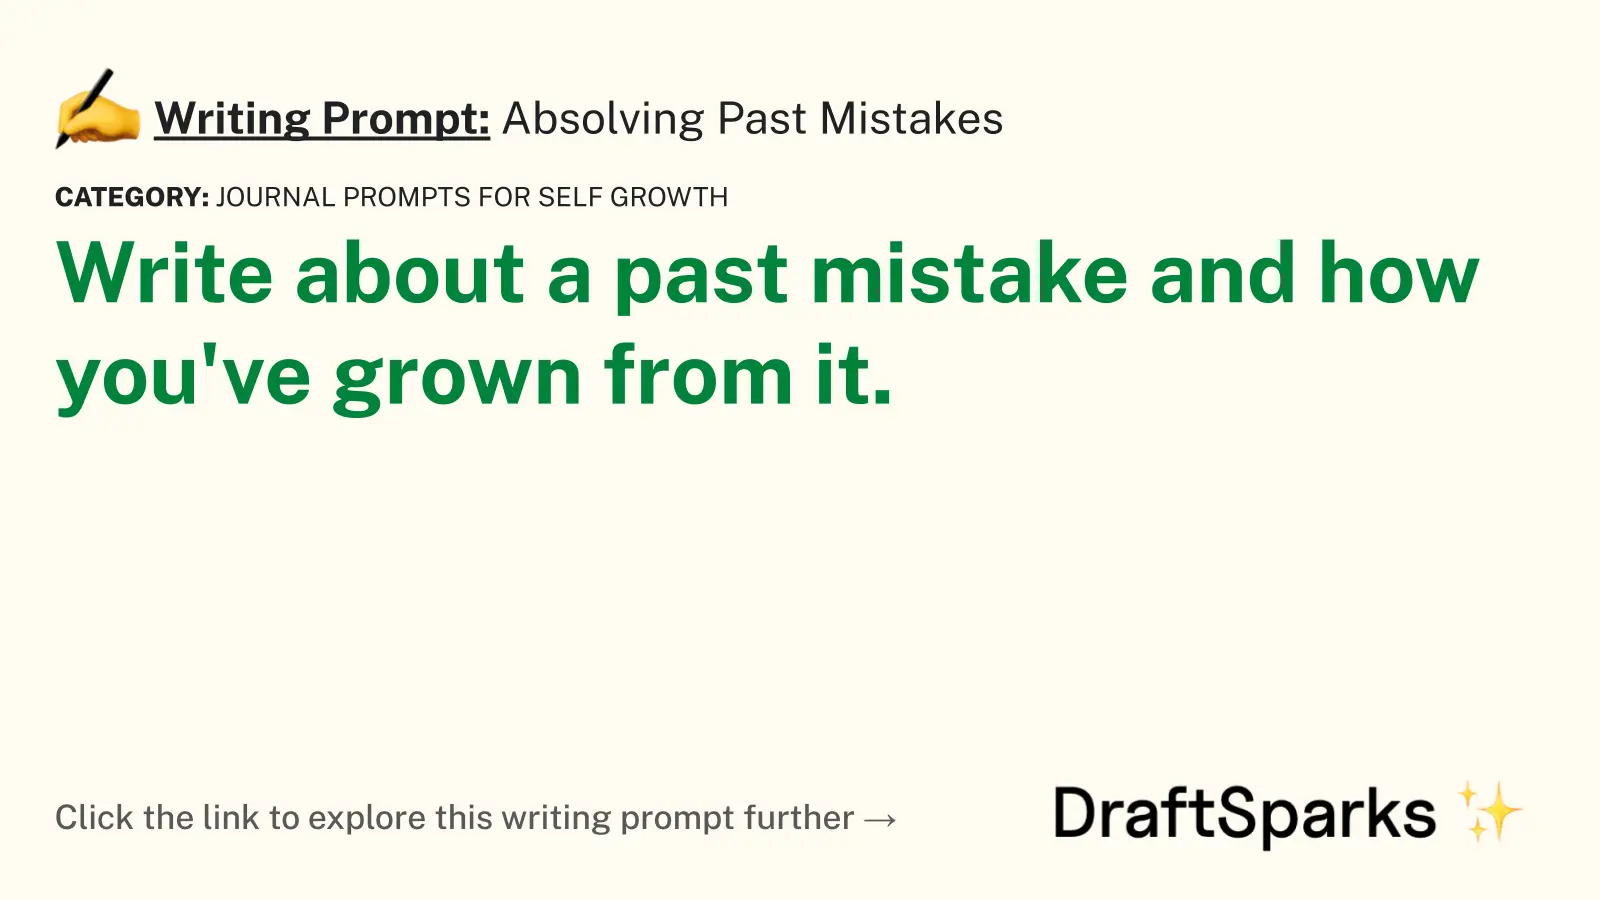 Absolving Past Mistakes